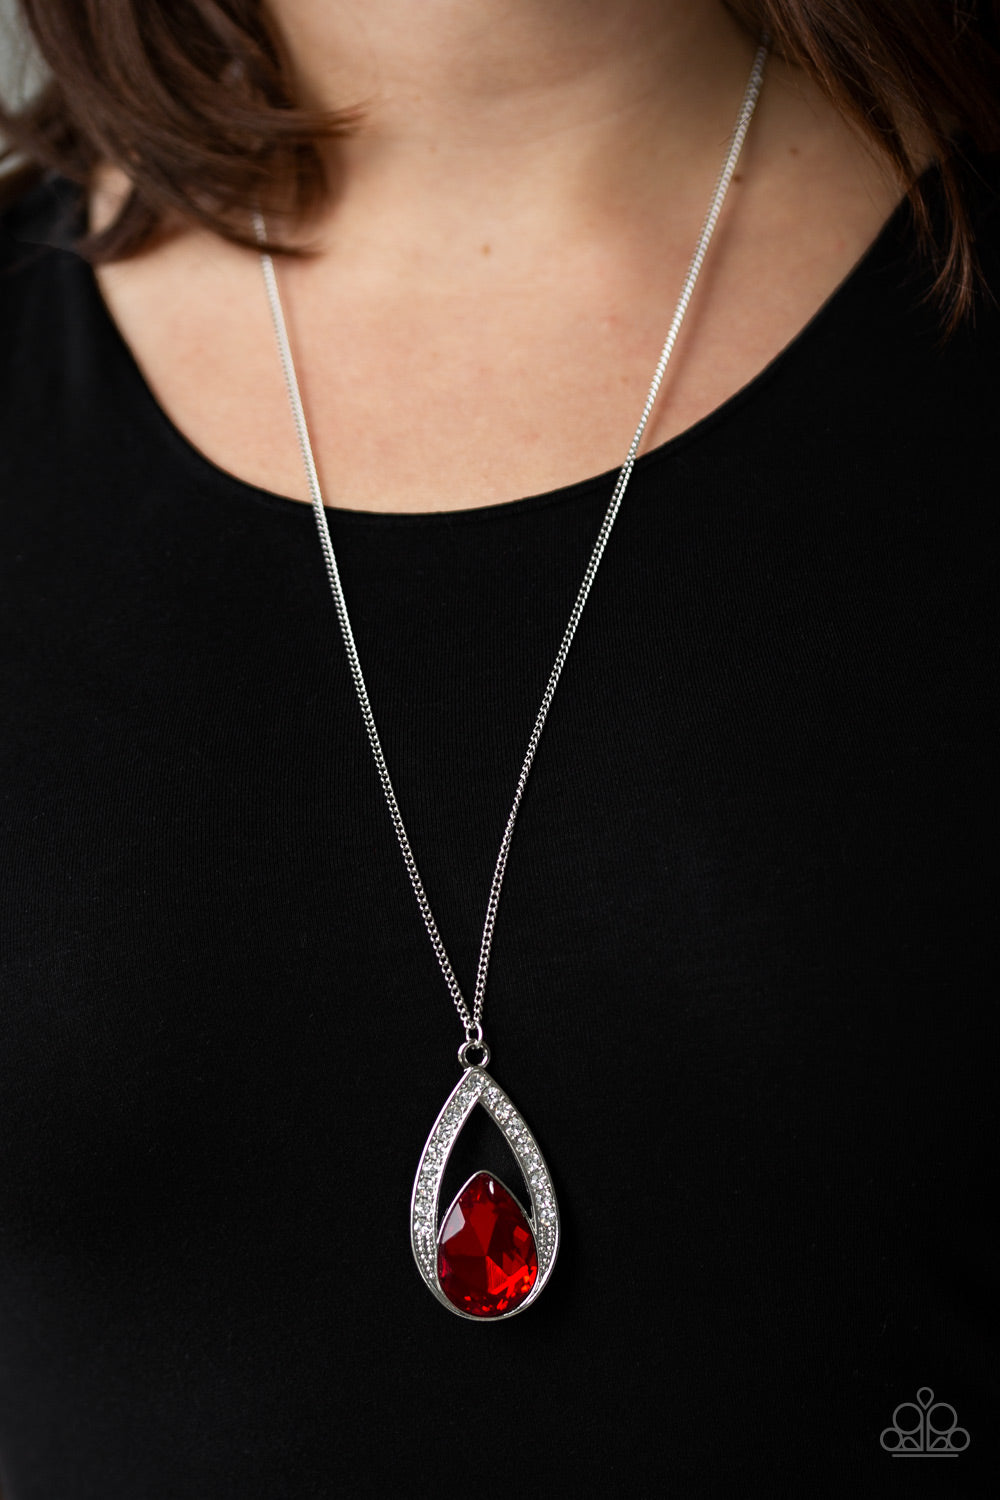 Paparazzi Jewelry & Accessories - Notorious Noble - Red Necklace. Bling By Titia Boutique